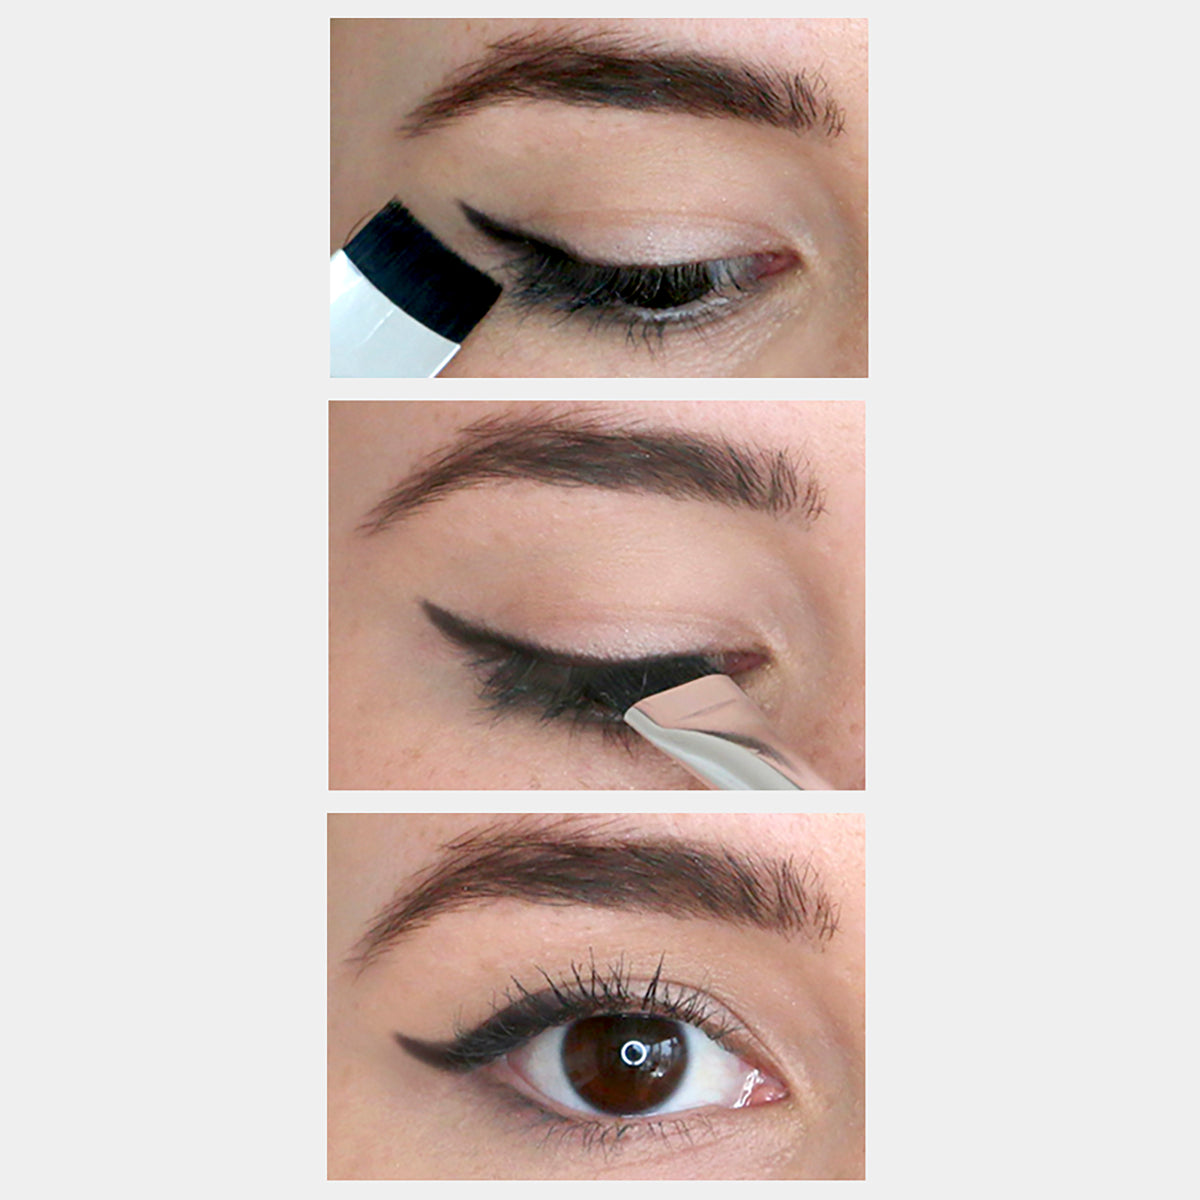 Three images demonstrating how to use the arc brush on upper lash line to create a simple cat eye look